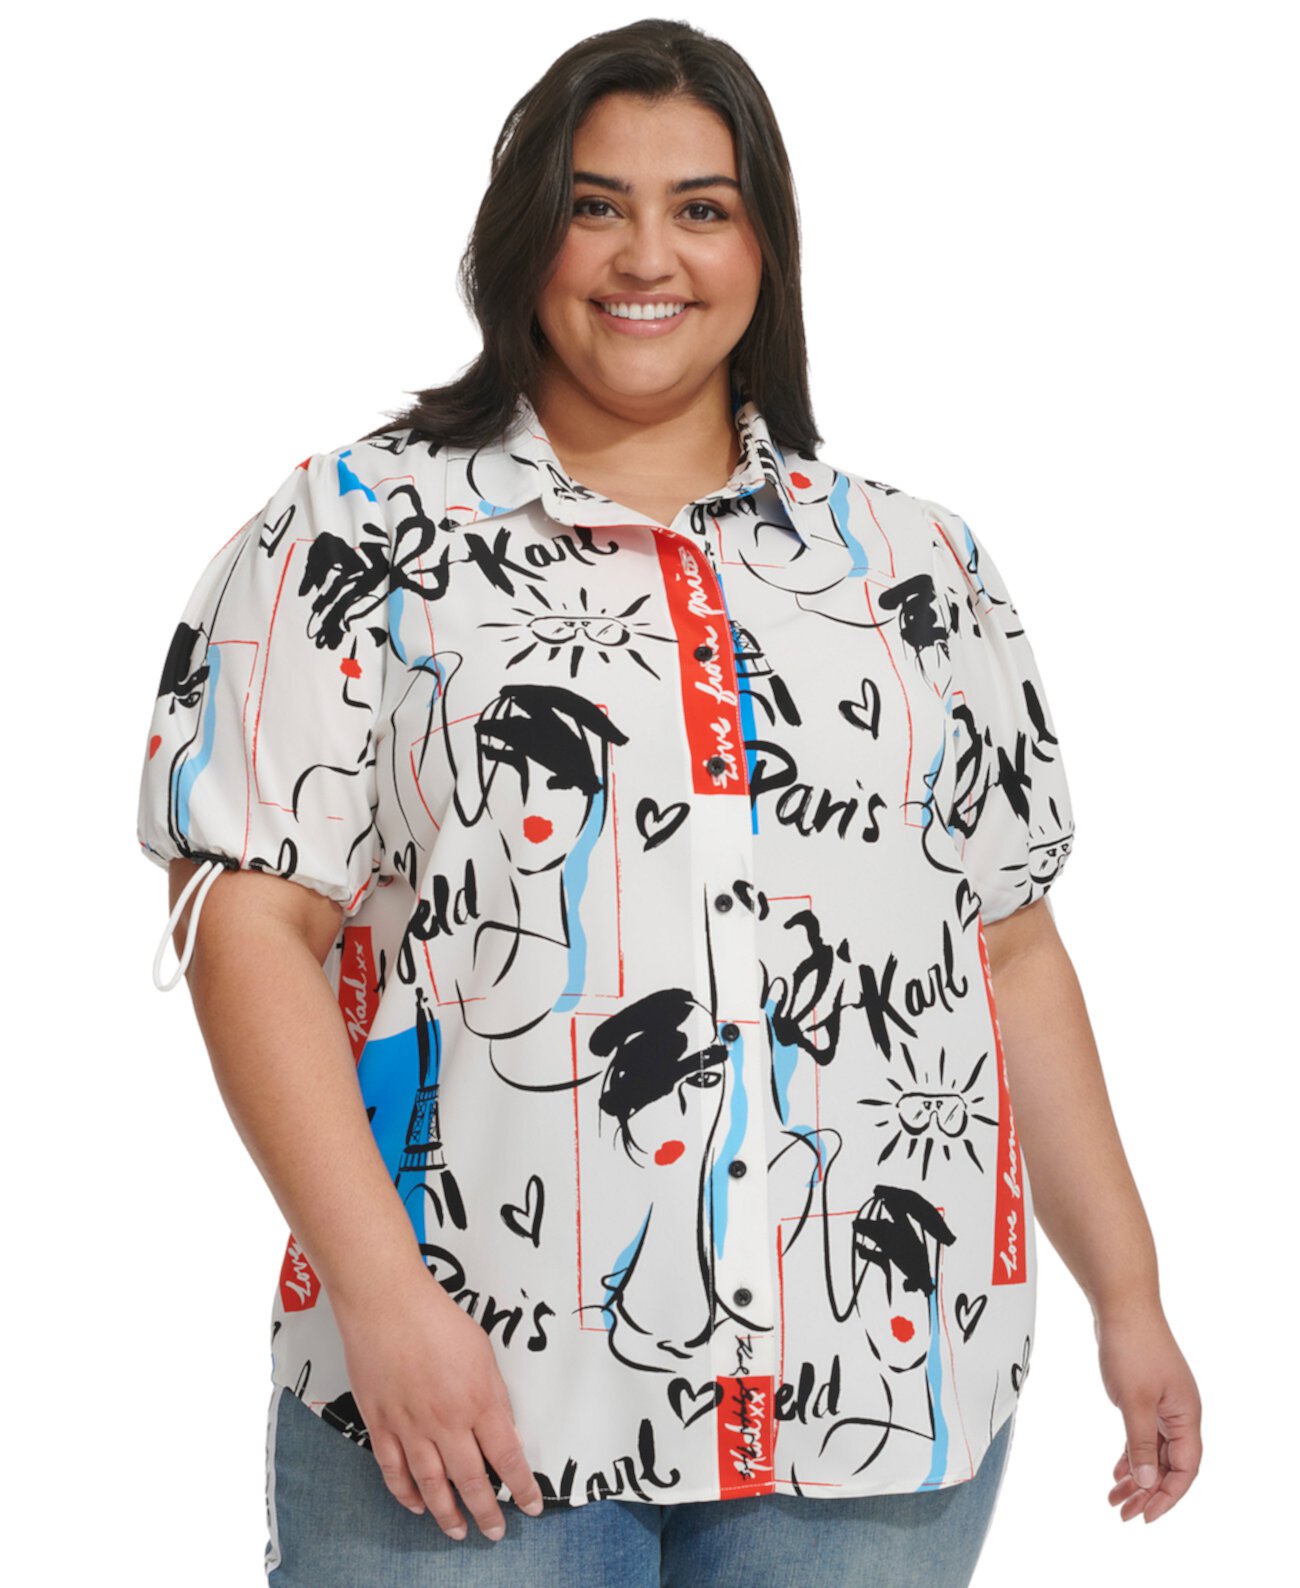 Plus Size Logo Graphic Short-Sleeve Shirt, Created for Macy's Karl Lagerfeld Paris